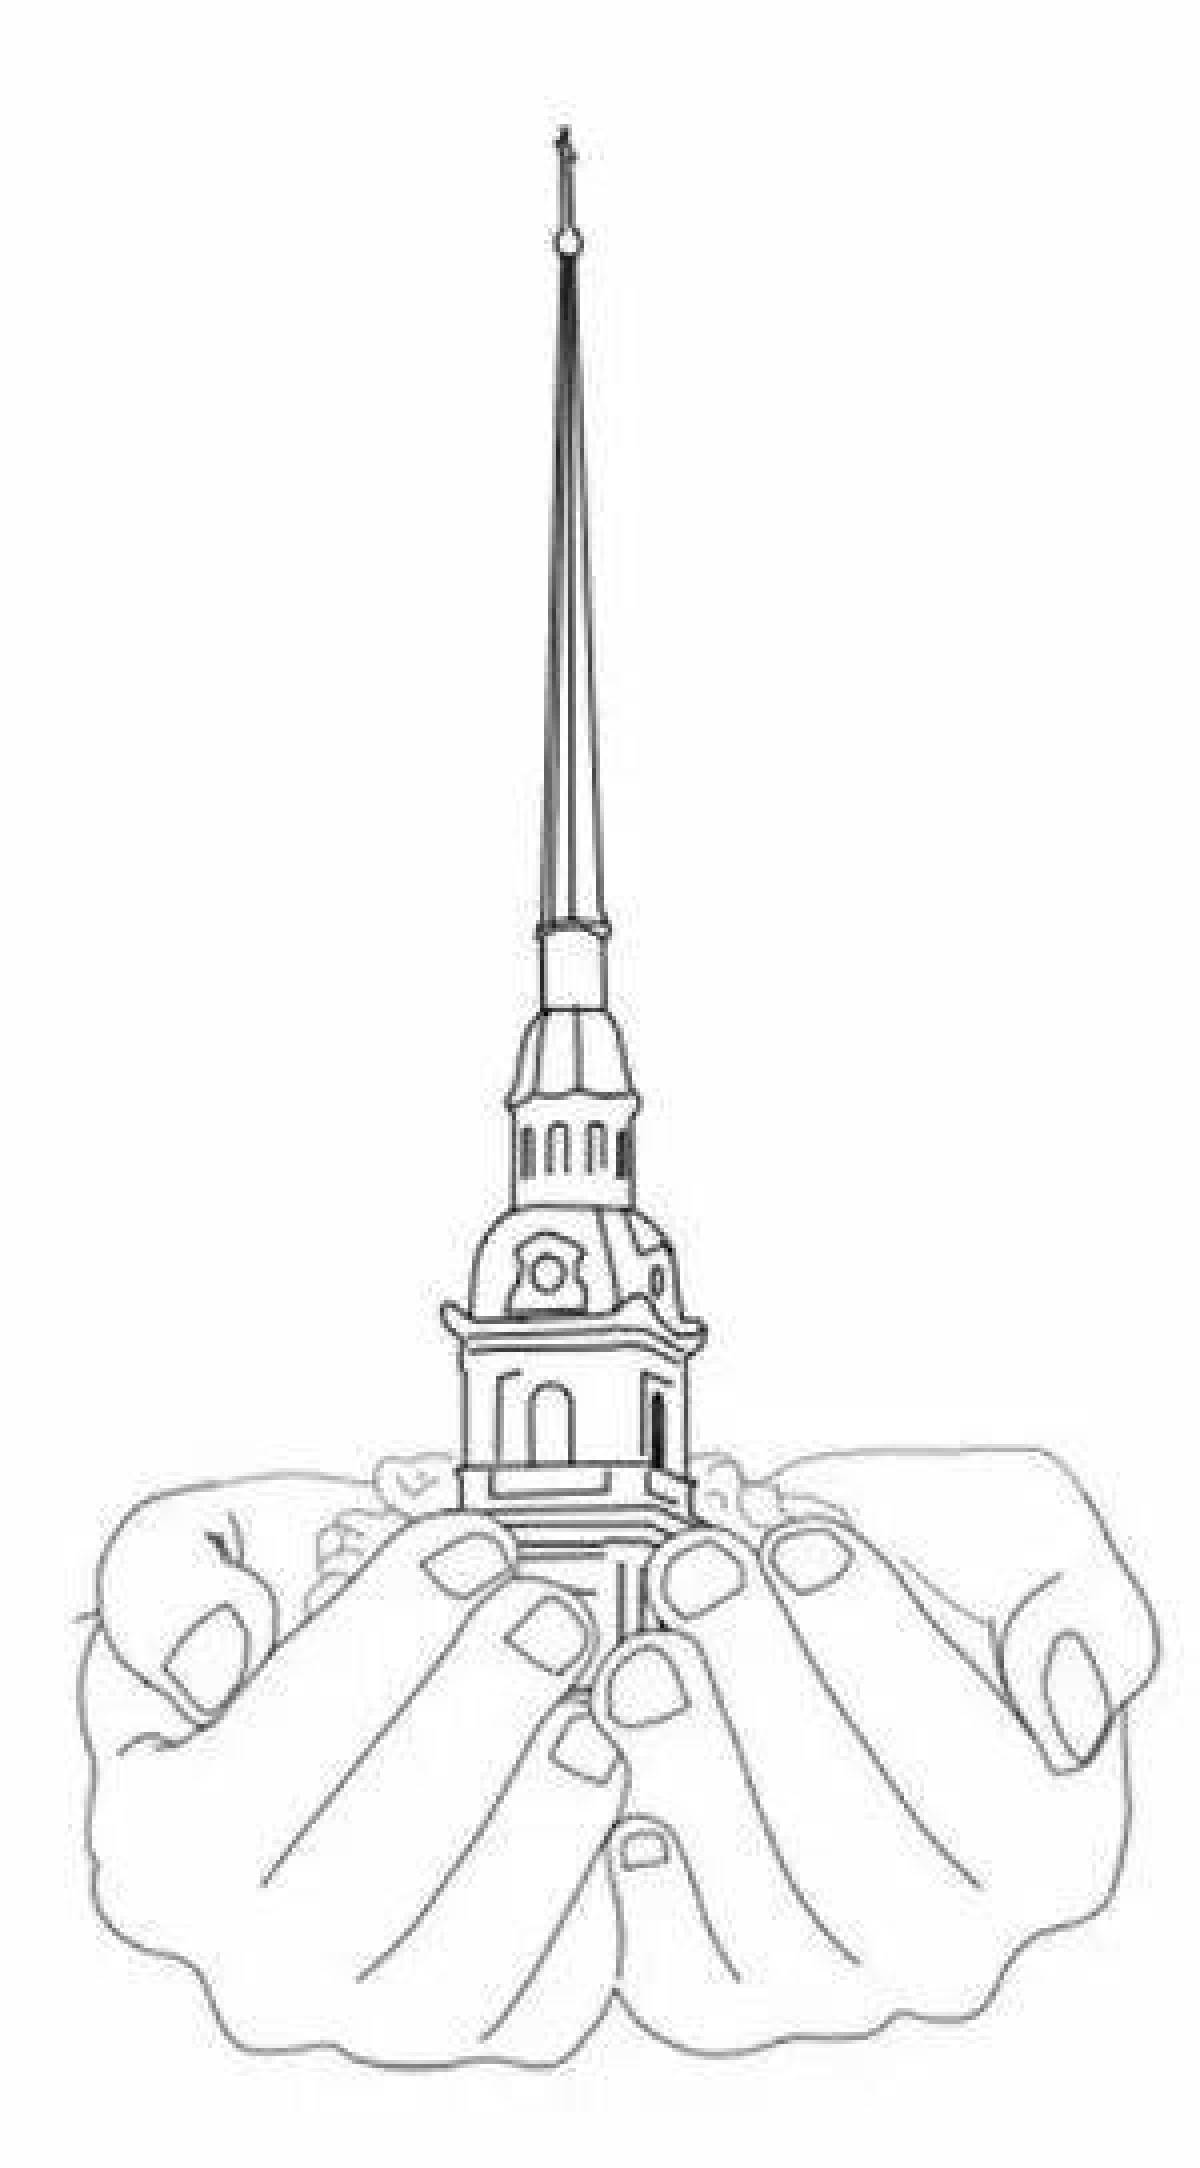 Sparkling Peter and Paul Fortress coloring page